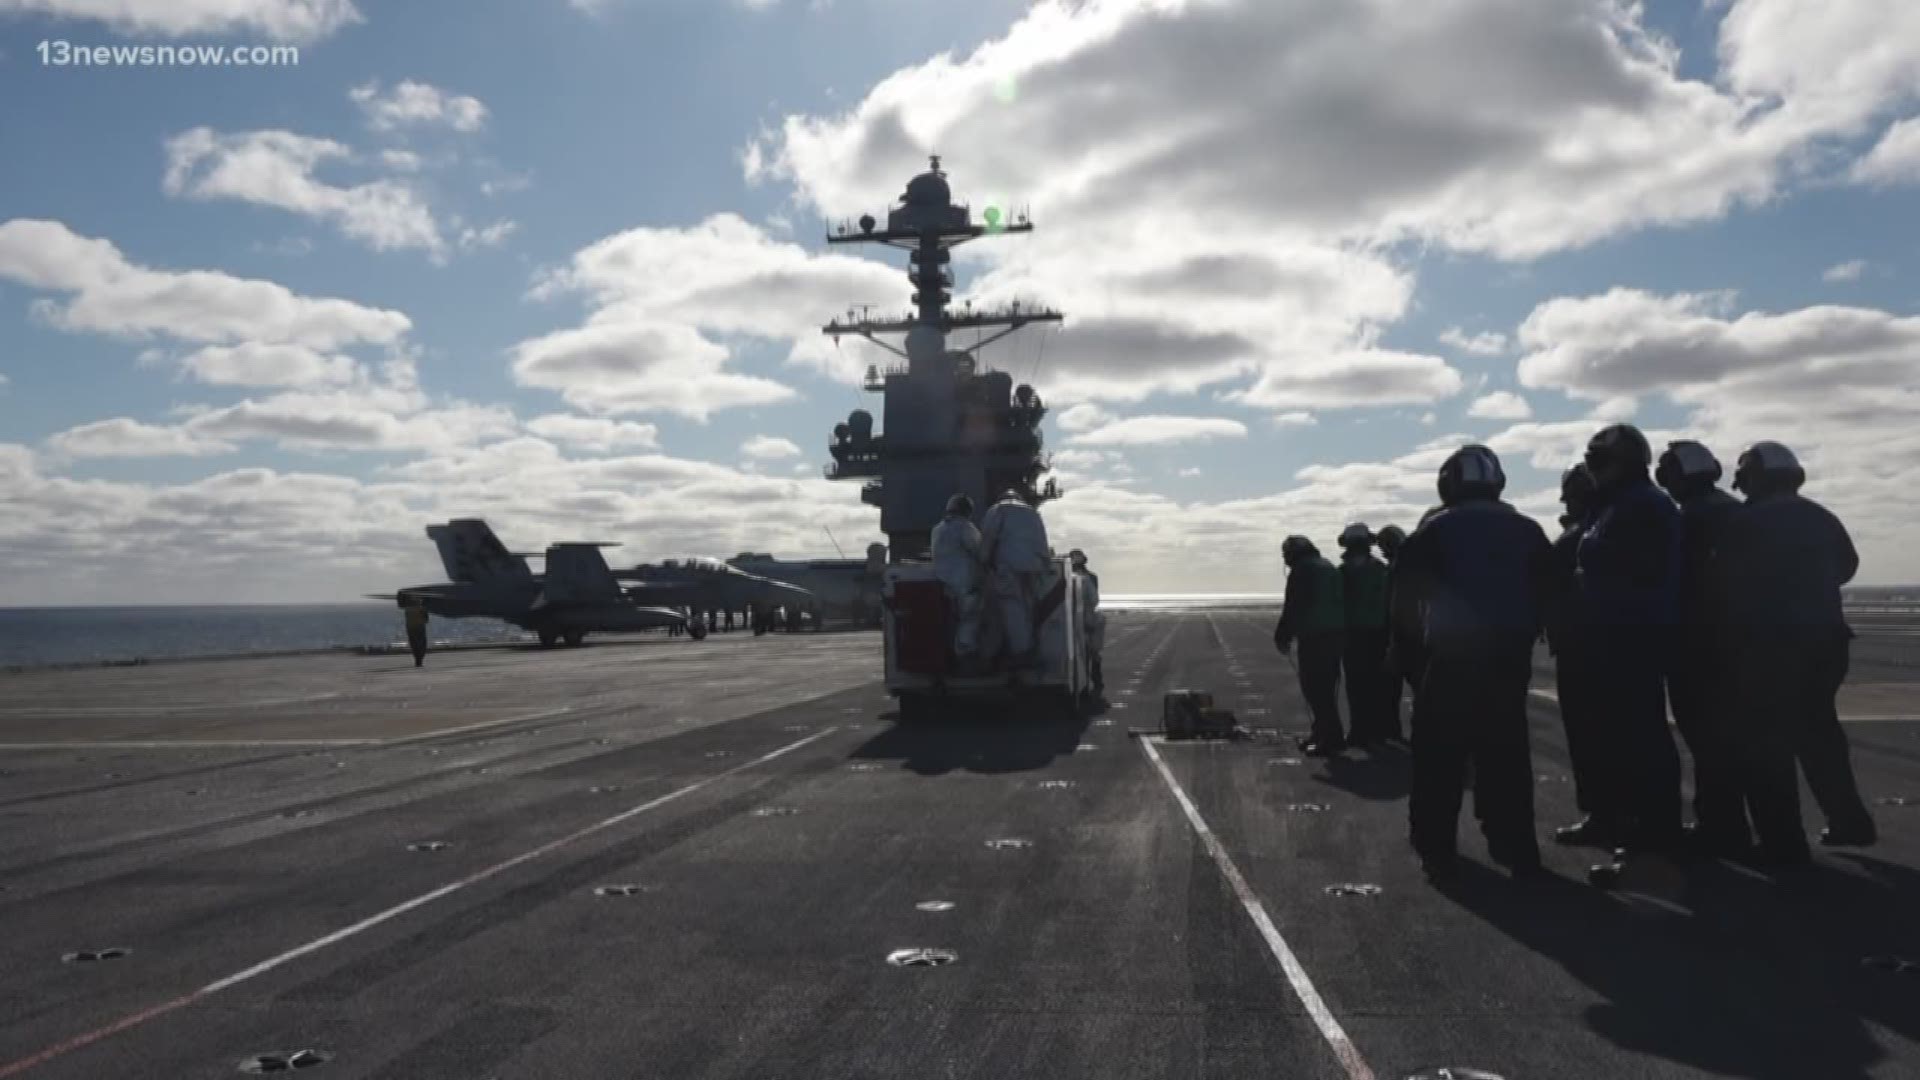 The USS Gerald R. Ford has remained at dock since its commissioning more than two years ago. Crews are still getting the ship ready for fleet operations.